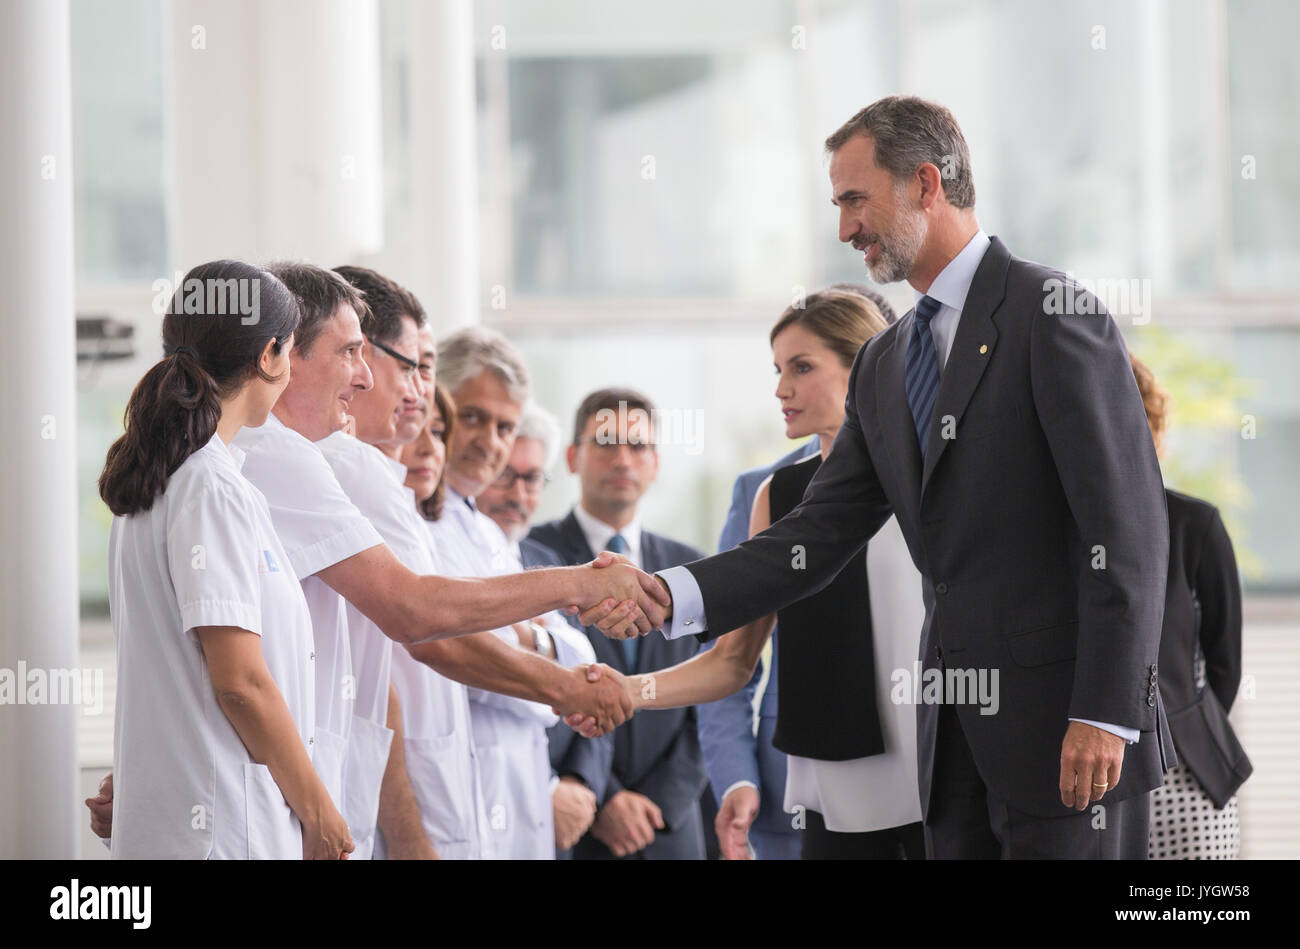 Barcelona, Spain. 19th Aug, 2017. Spain's King Felipe VI (1st R) and Queen Letizia (2nd R) greet the medical staff of the Hospital del Mar during a visit to the victims of the terrorist attacks in Barcelona, Spain, Aug. 19, 2017. A total of 14 fatalities occurred in two terrorist attacks in the Spanish cities of Barcelona and Cambrils that also hurt about 126 people. Credit: Xu Jinquan/Xinhua/Alamy Live News Stock Photo